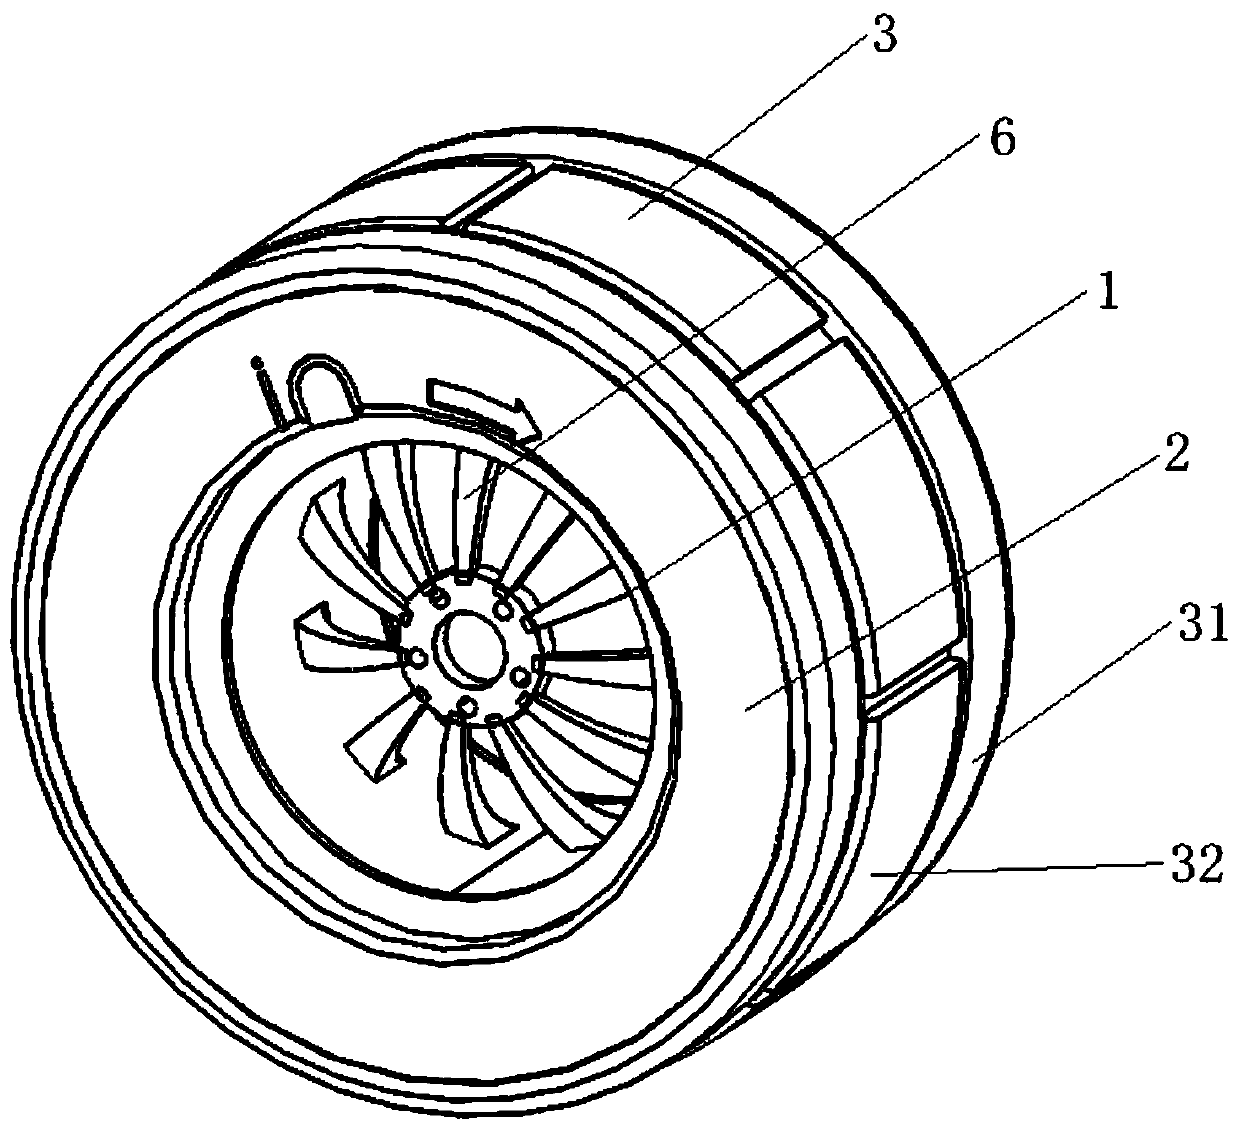 Safe and energy-saving wheel with variable grounding area